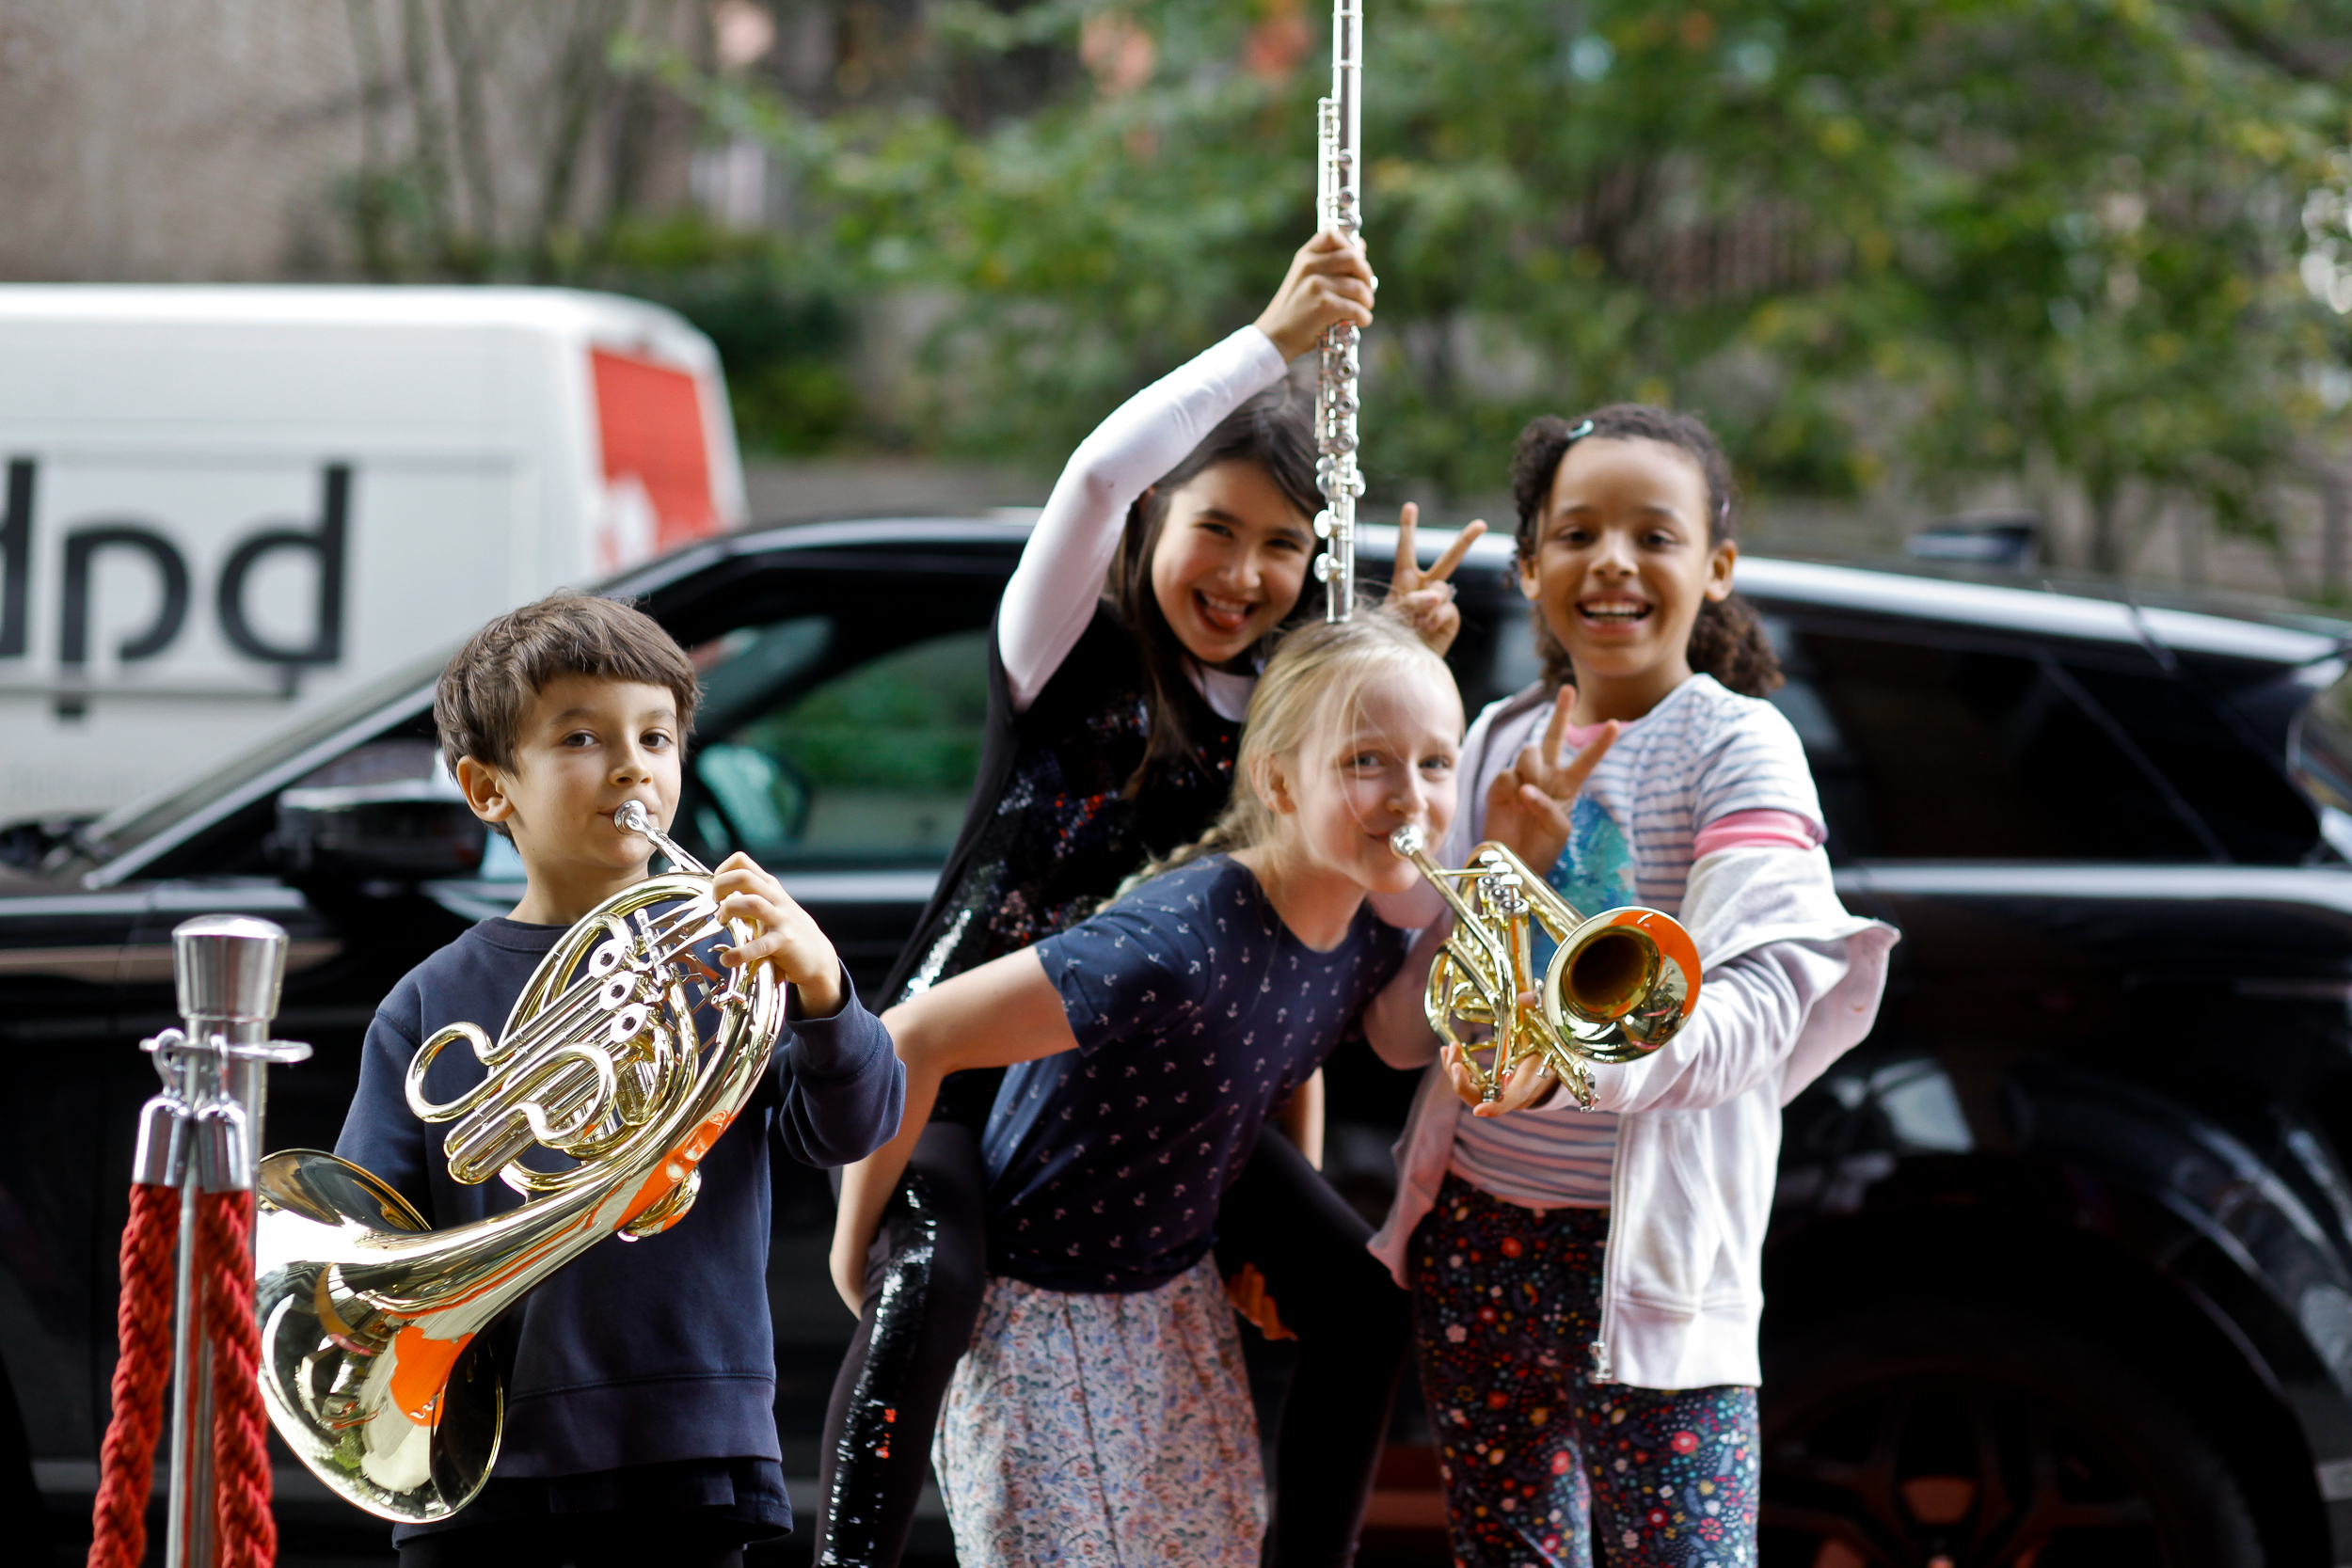 four young people pose playfully with different instruments